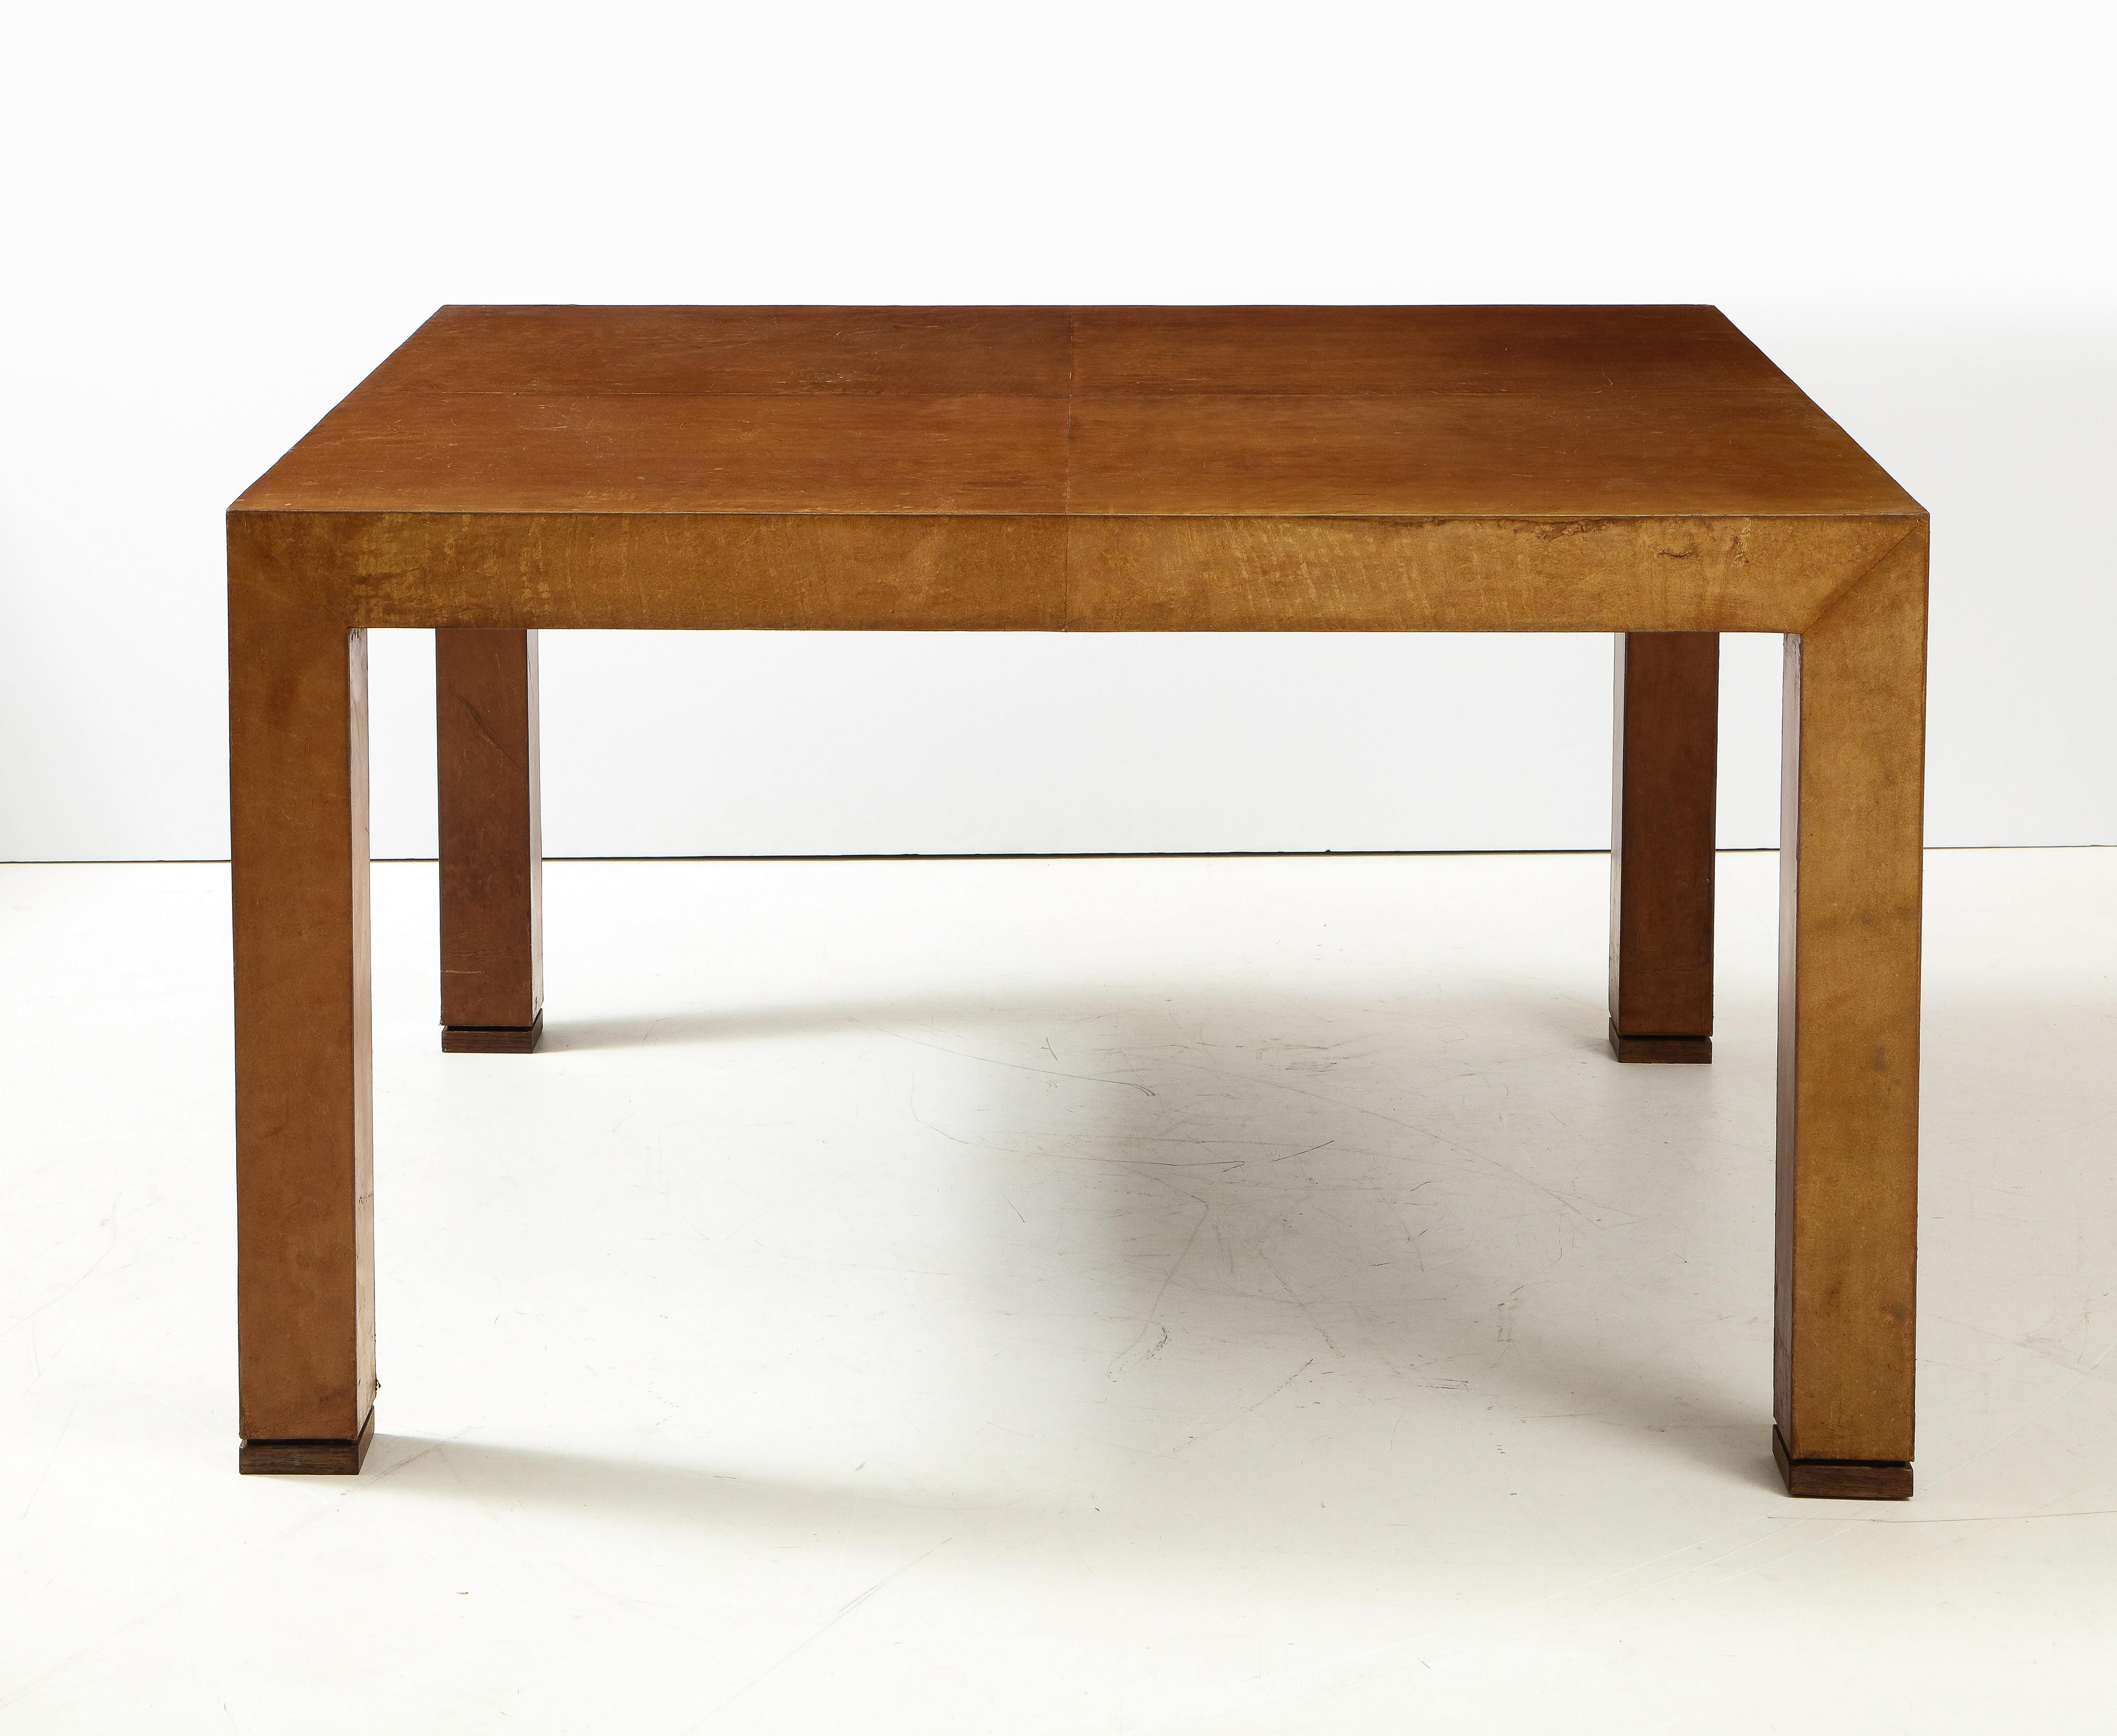 Havana Leather Dining Table, France, c. 1960-70 For Sale 3